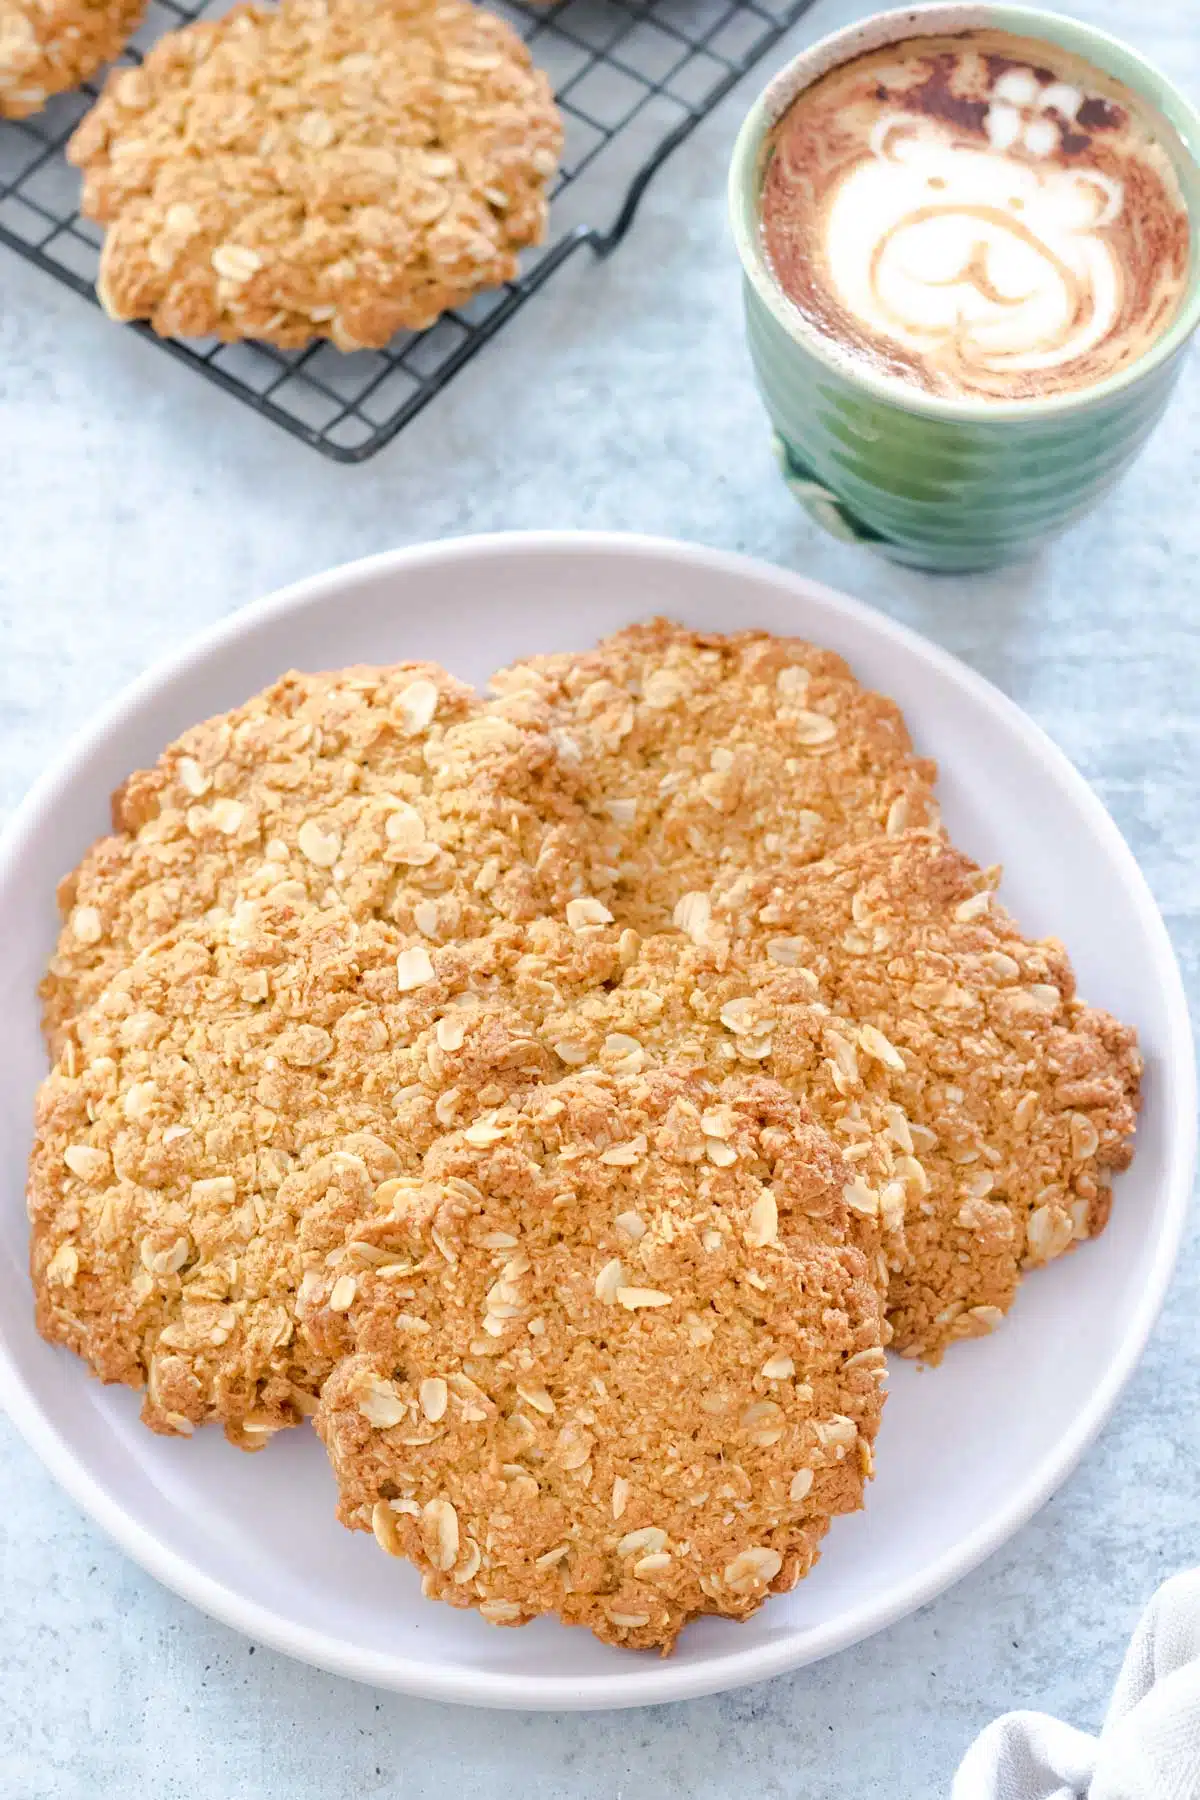 A light purple plate has been filled with golden Anzac Biscuits. A cup of coffee is in the background with a bear in latte art on the top. Just beside this is a cooling rack filled with more Anzac biscuits.